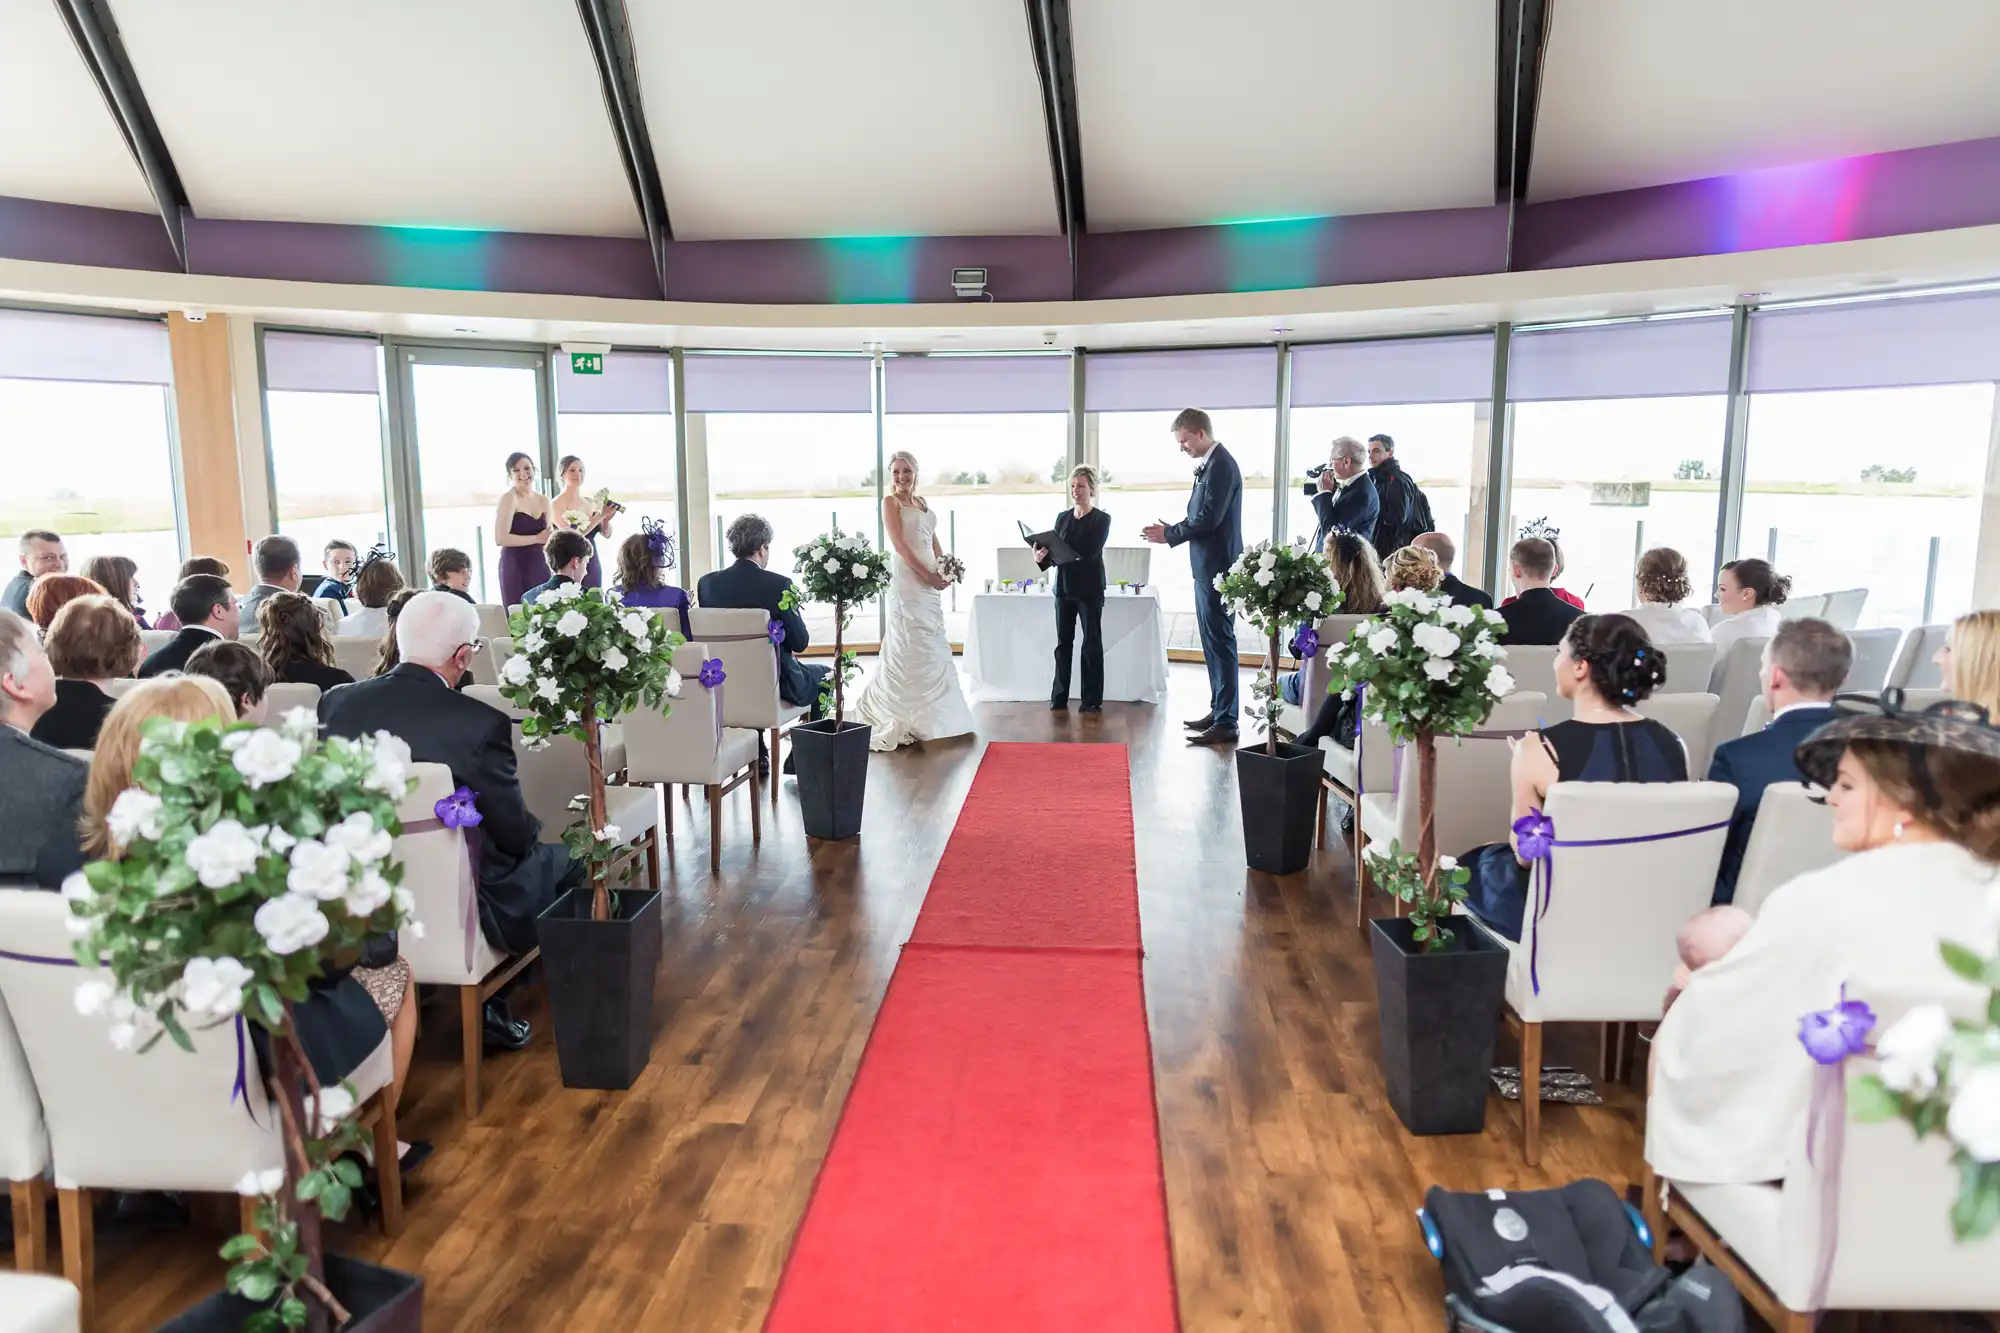 A wedding ceremony in a modern venue with guests seated, a couple standing at the altar, and red carpet aisle, surrounded by floor-to-ceiling windows.